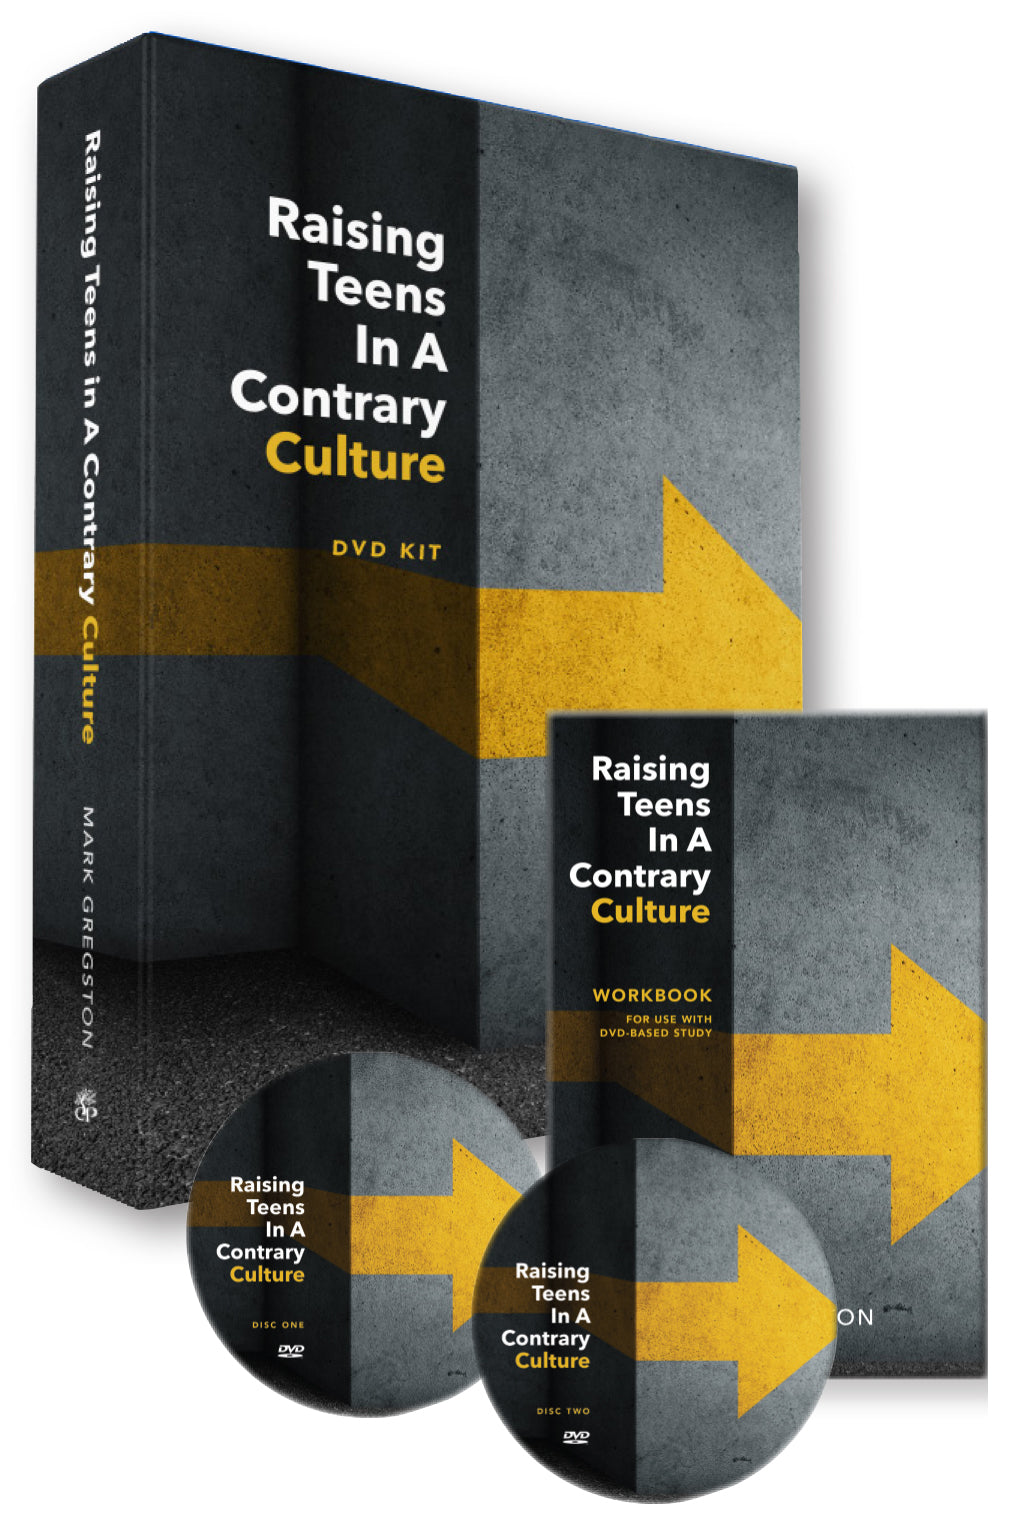 Raising Teens in a Contrary Culture DVD Kit